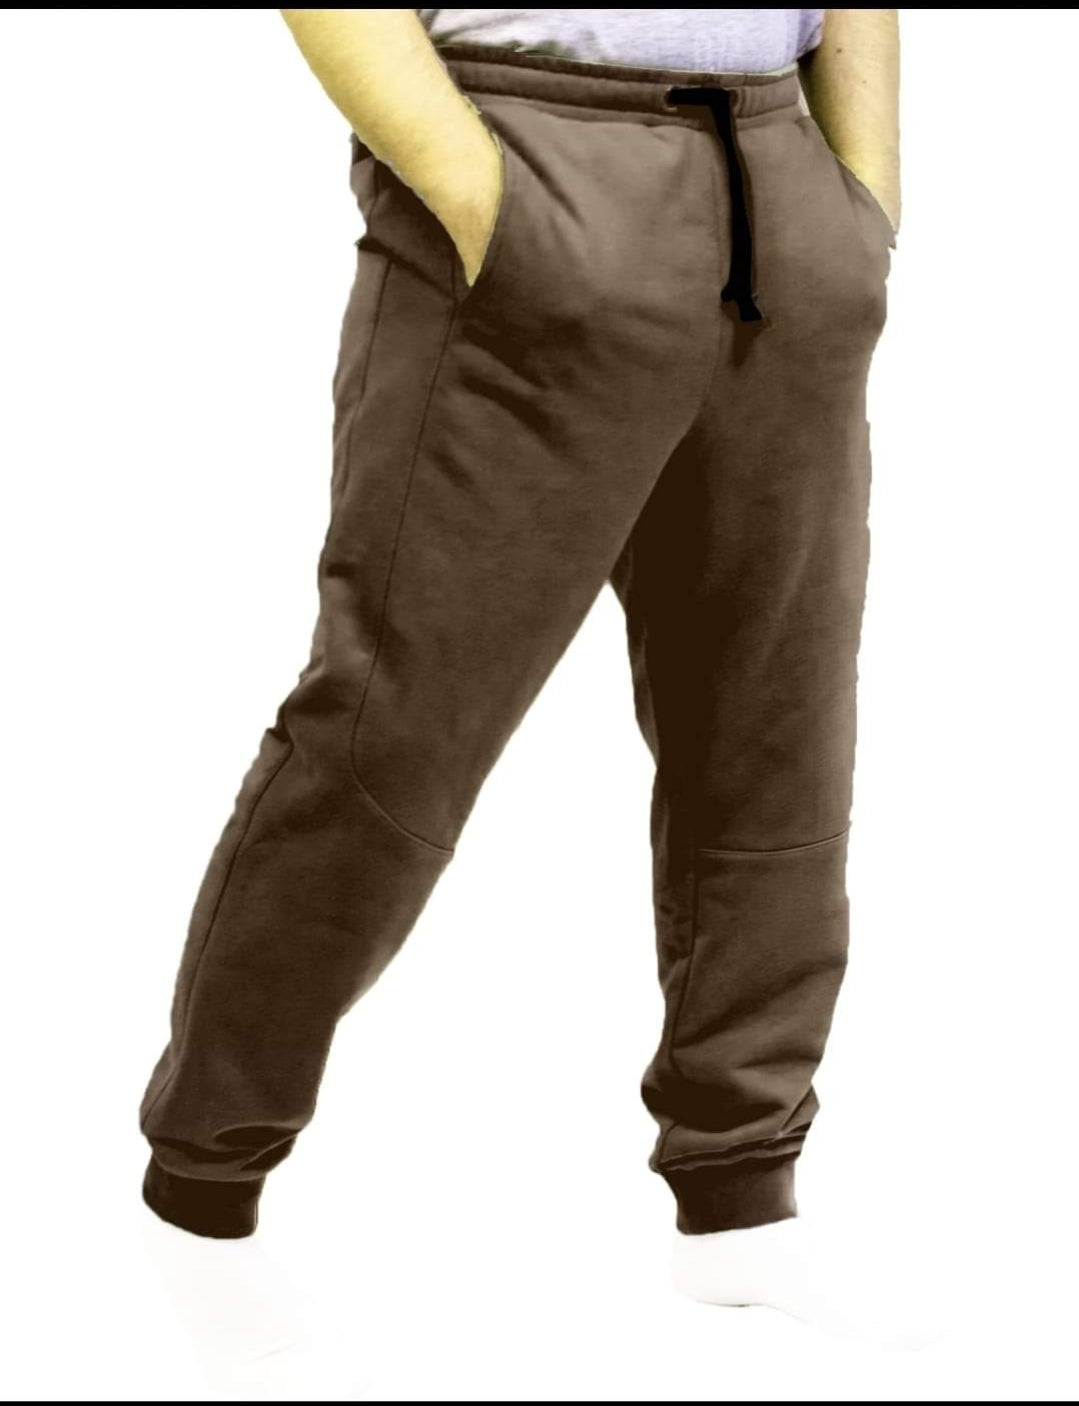 Solid Brown Joggers and Lounge Pants